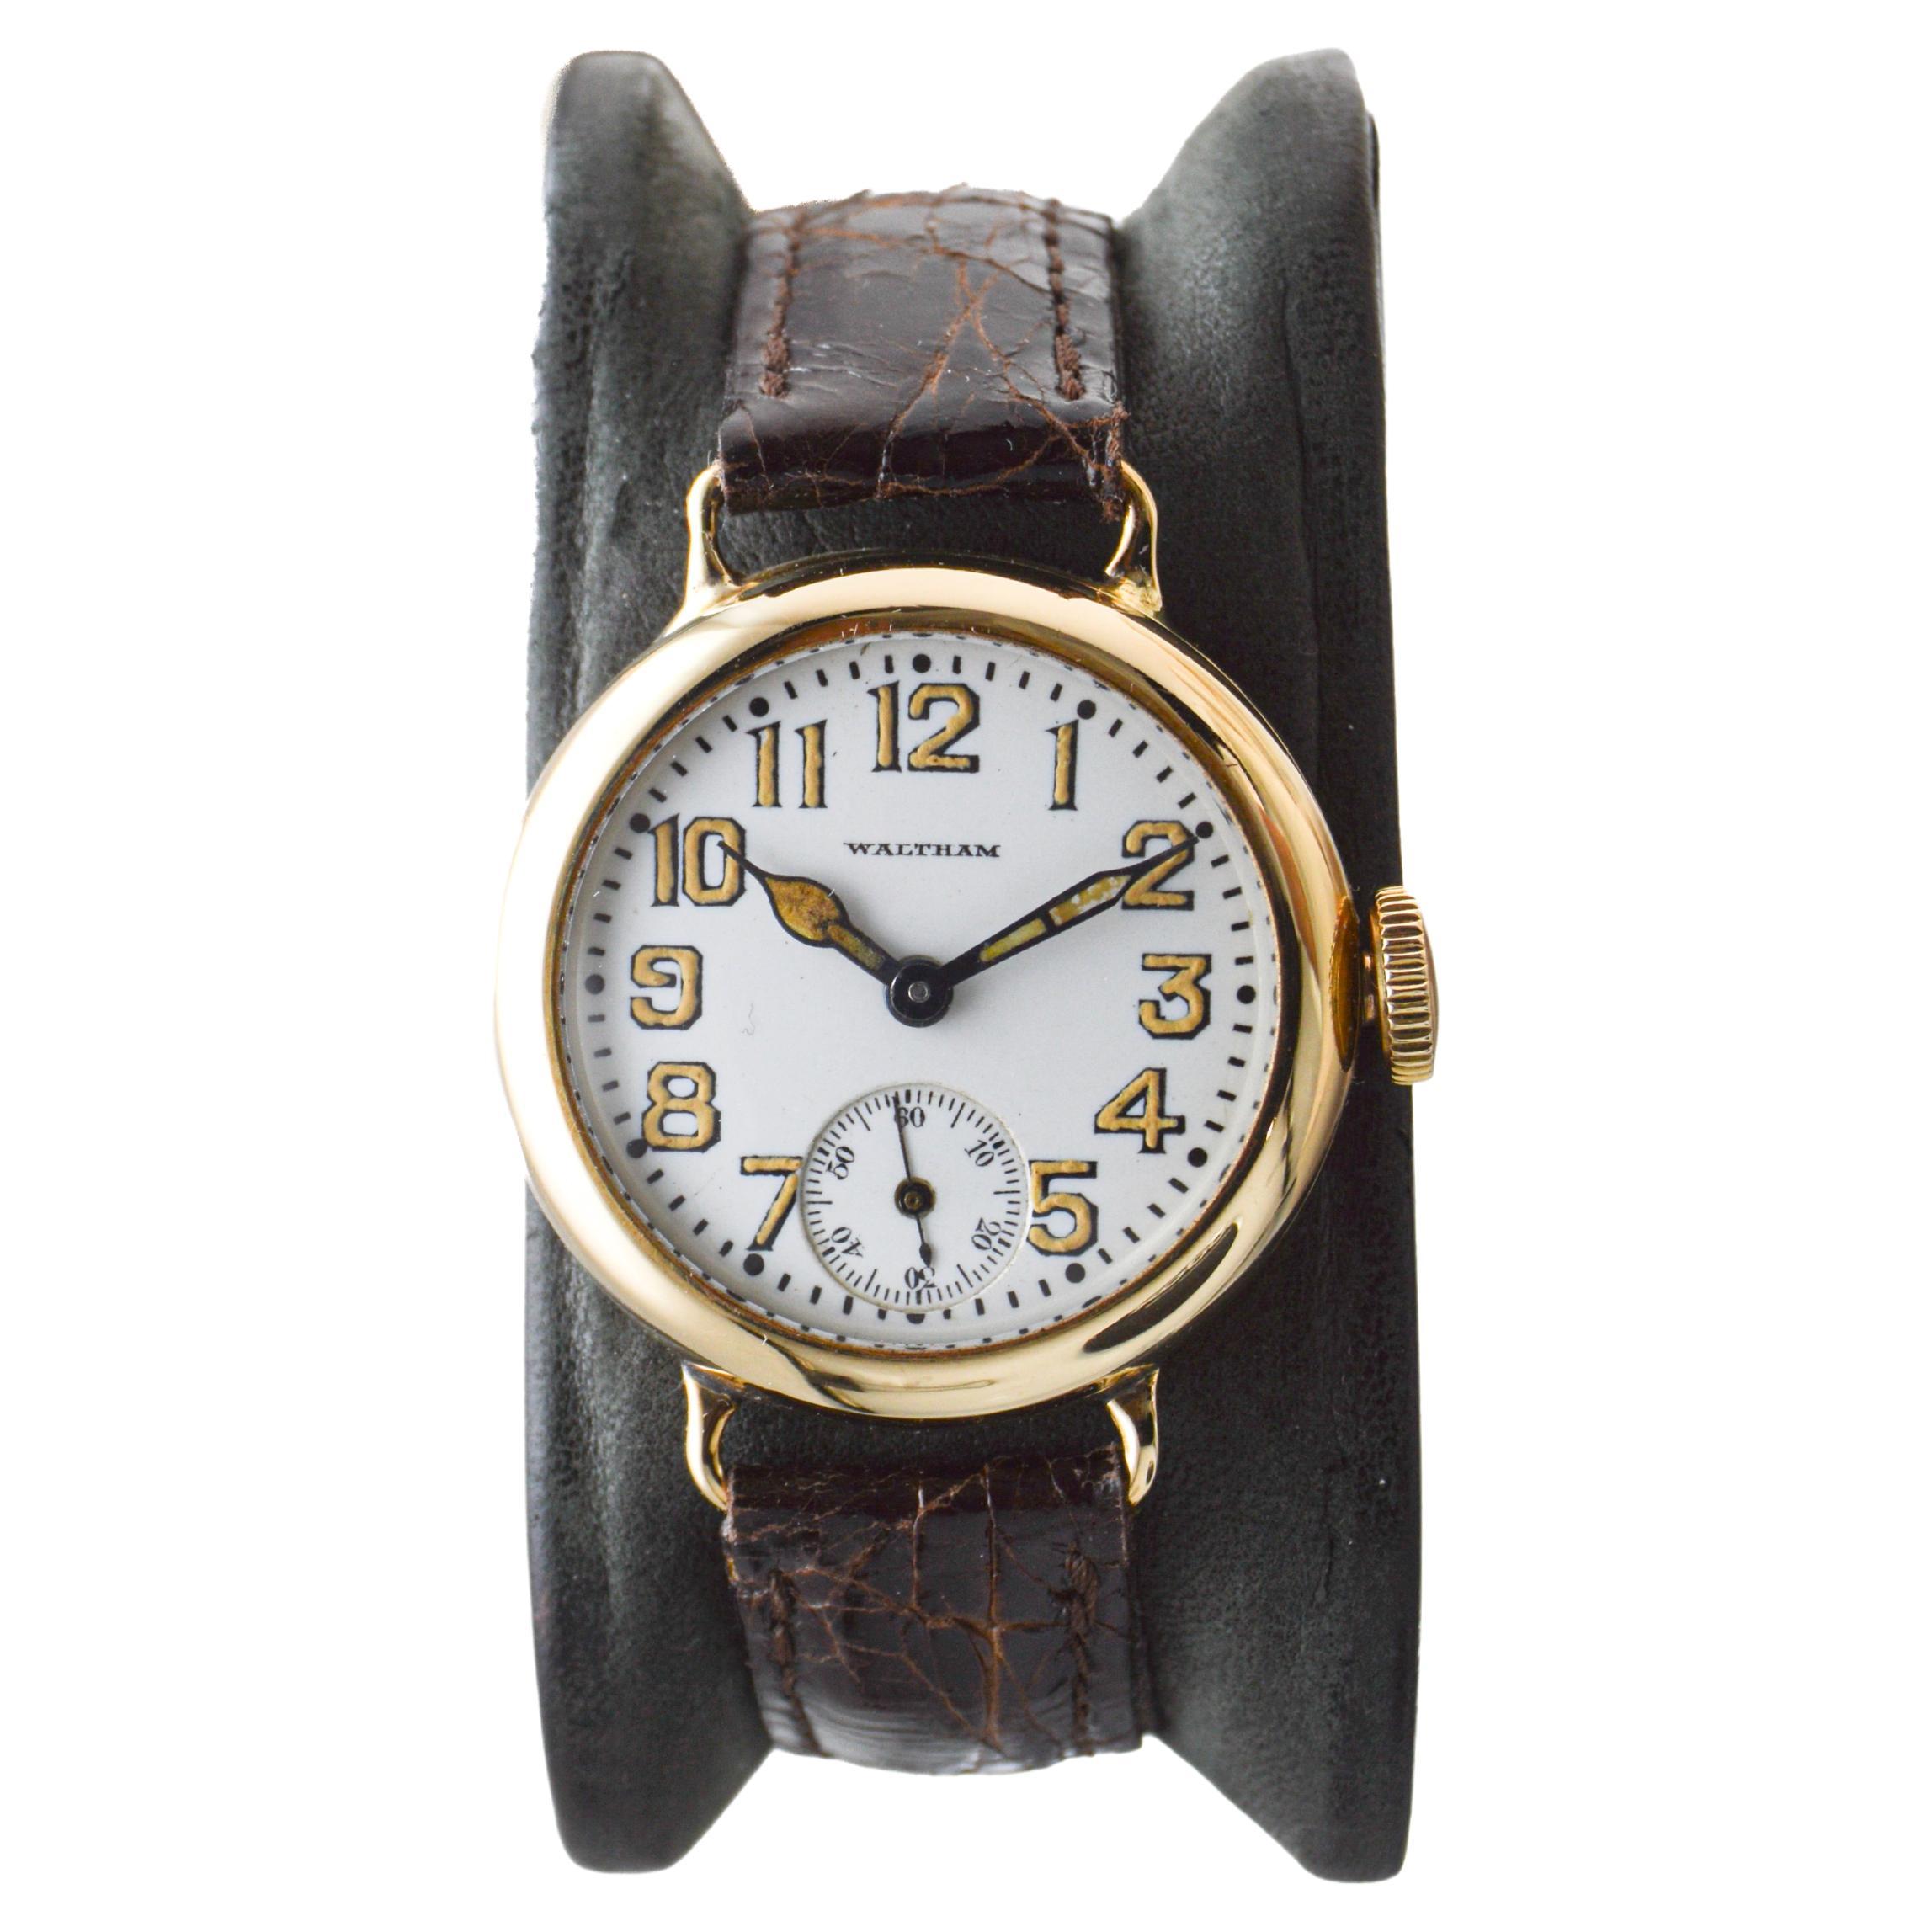 Art Deco Waltham 14Kt. Gold Campaign Style Watch from 1915 with Original Enamel Dial 1929 For Sale